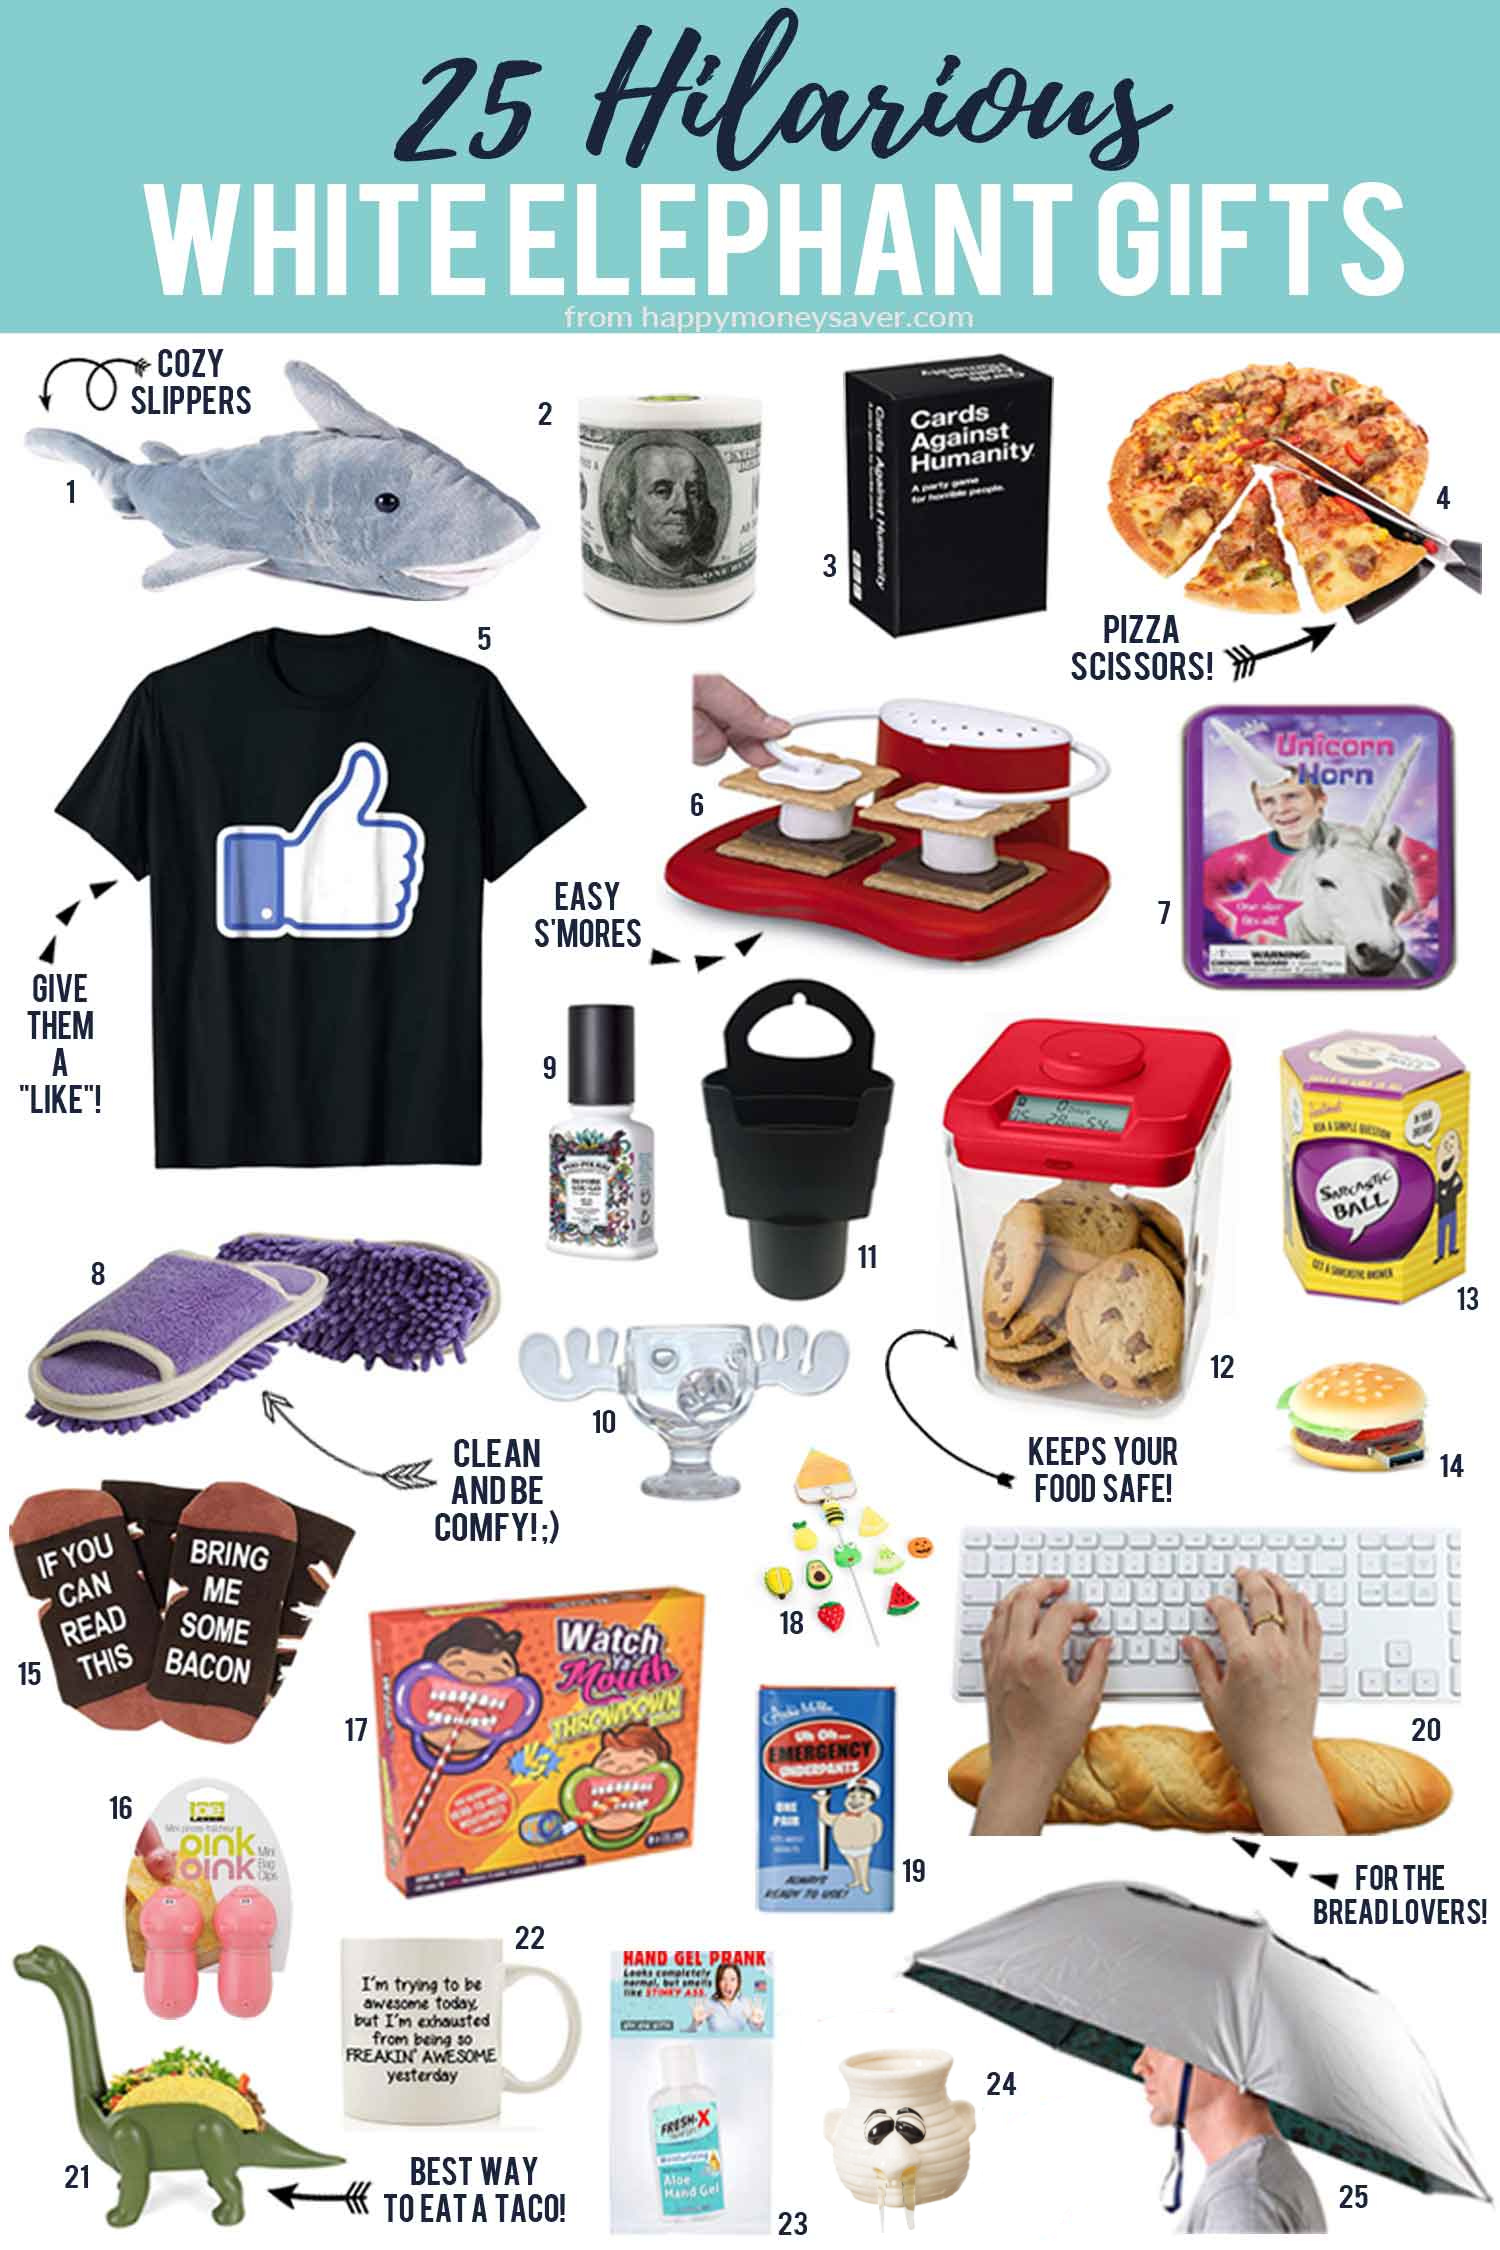 25 Hilarious White Elephant Gifts image with lots of product images each with a corresponding number on it. 